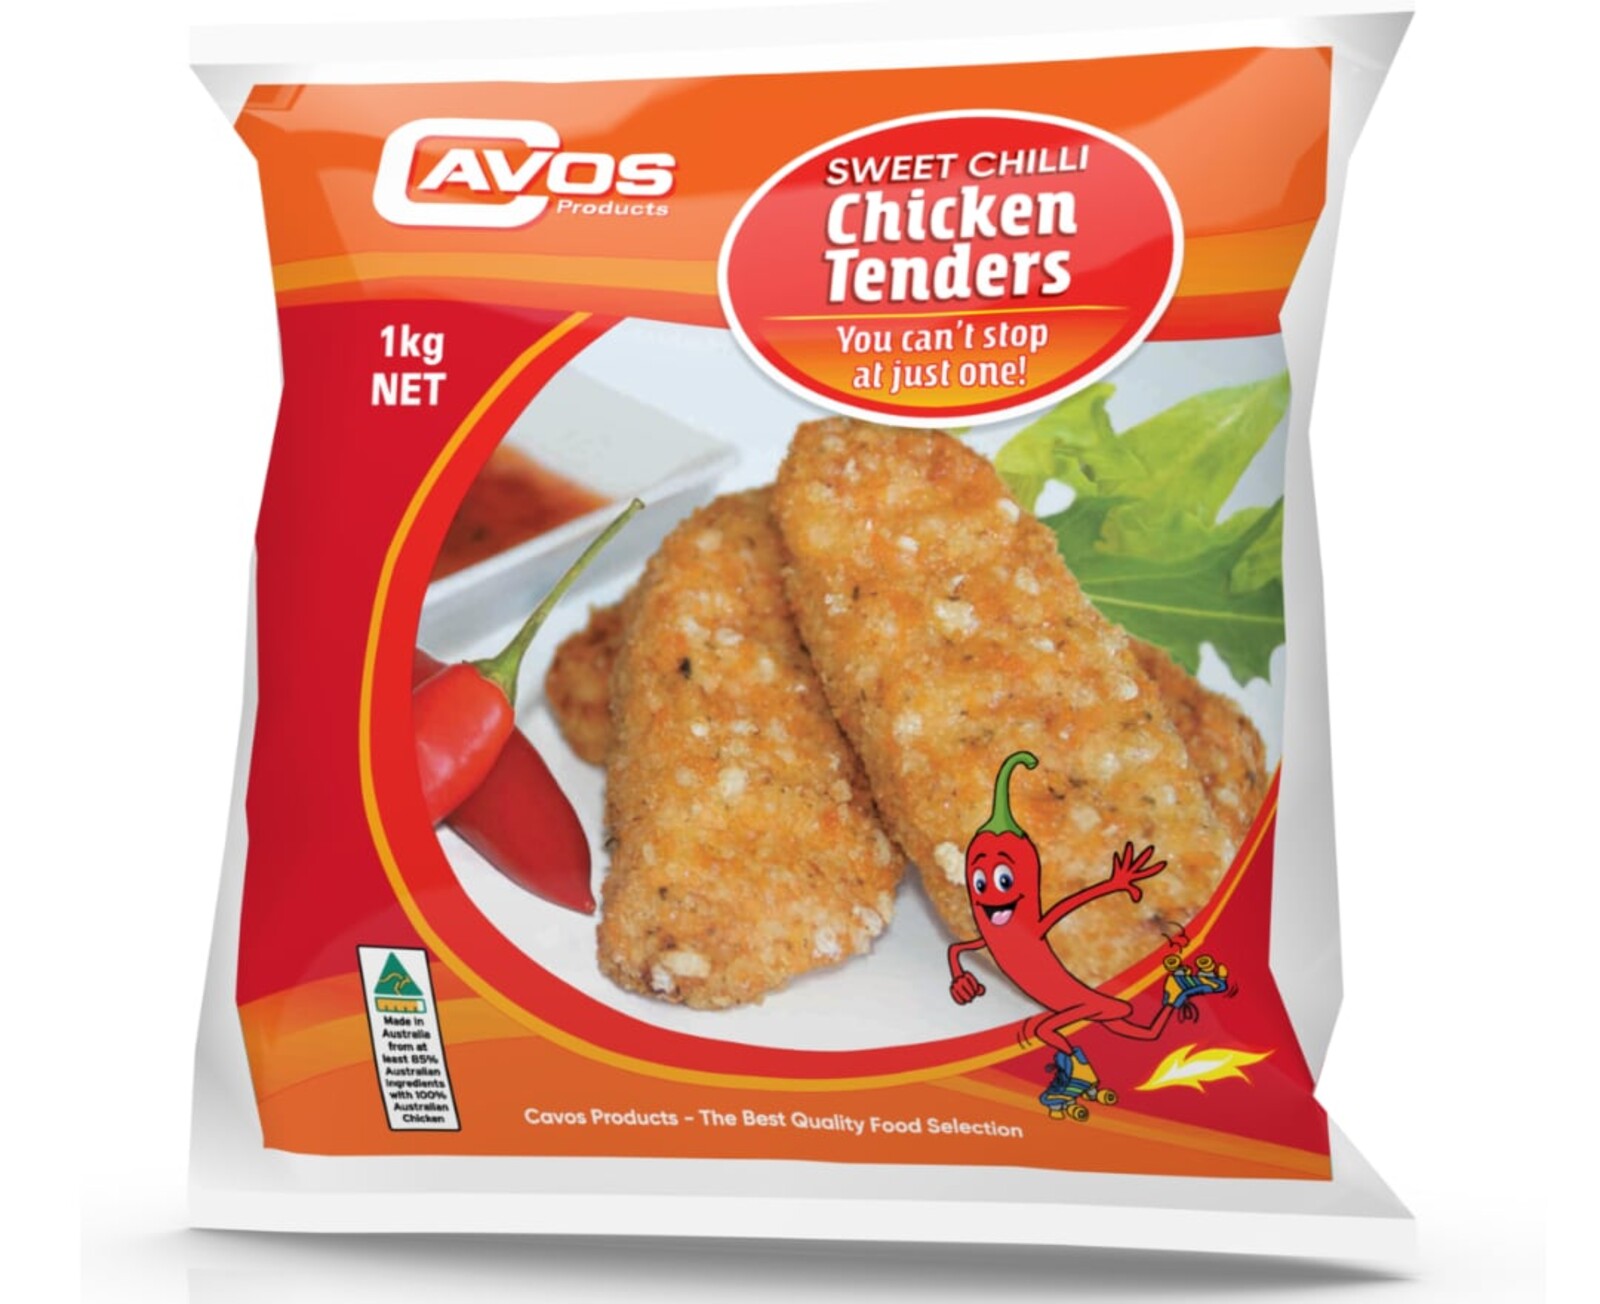 Cavos Products Sweet Chilli Chicken Tenders